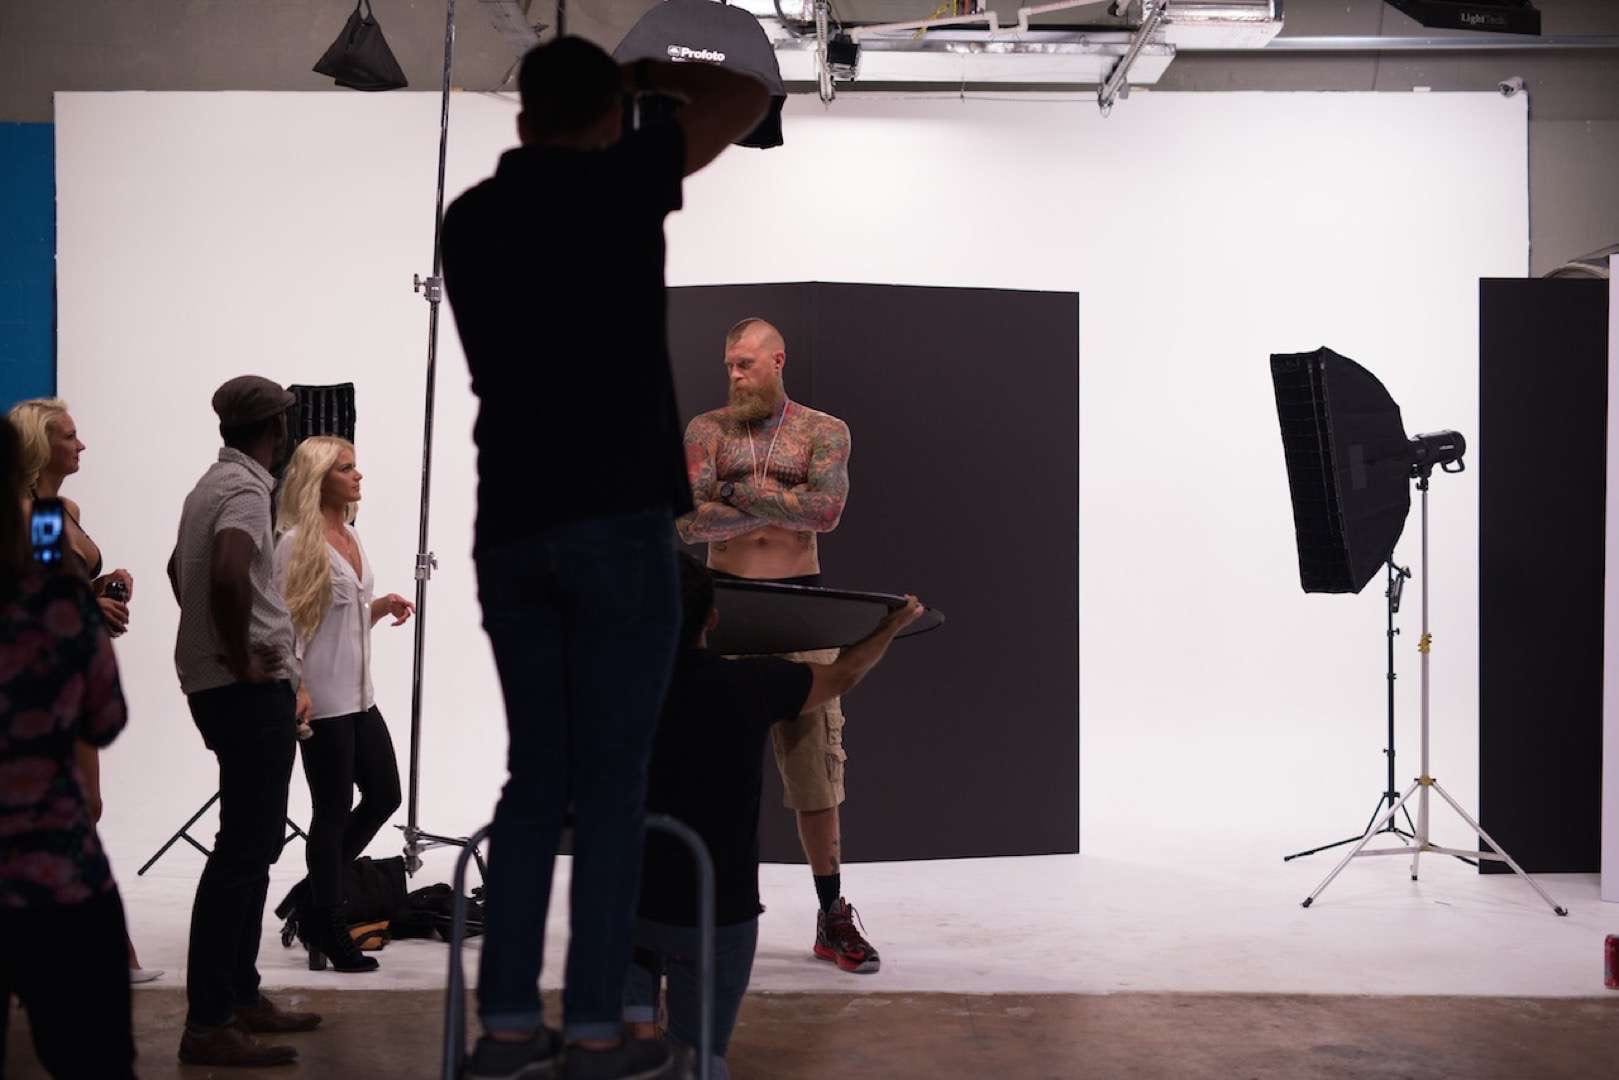 Hard Rock Energy BTS Tattooed man with mohawk posing for camera man and crew